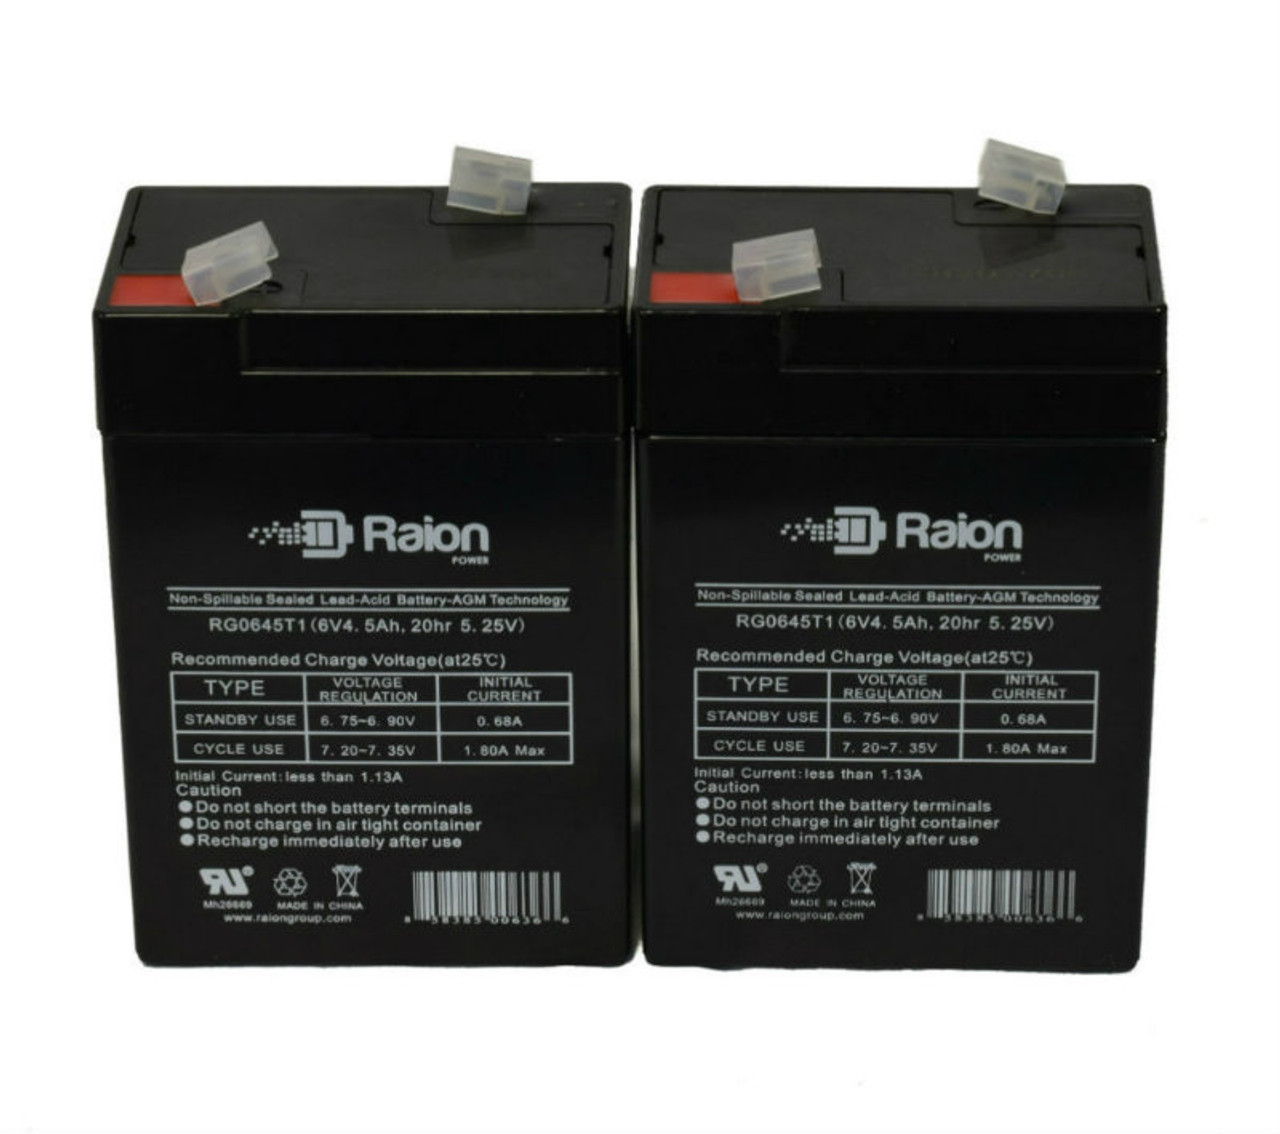 Raion Power RG0645T1 6V 4.5Ah Replacement Medical Equipment Battery for Criticare Systems 50245 Pulse Oximeter - 2 Pack